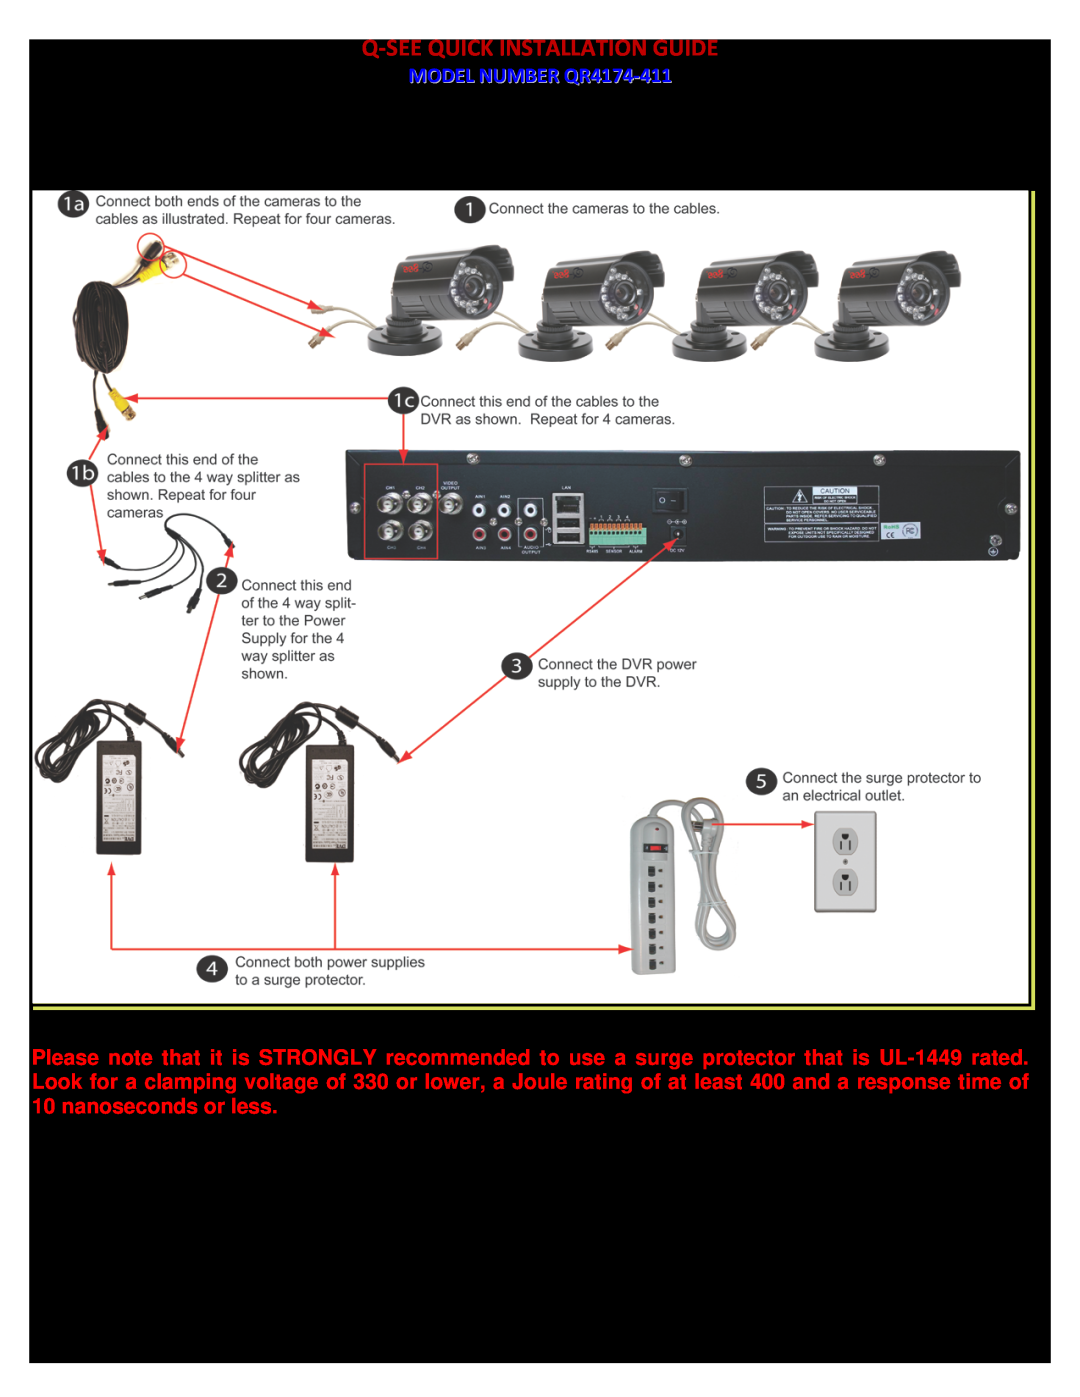 Q-See QR4174-411 manual PART 2 - DVR CAMERA AND POWER CONNECTIONS, P a g e, Q-Seequick Installation Guide 